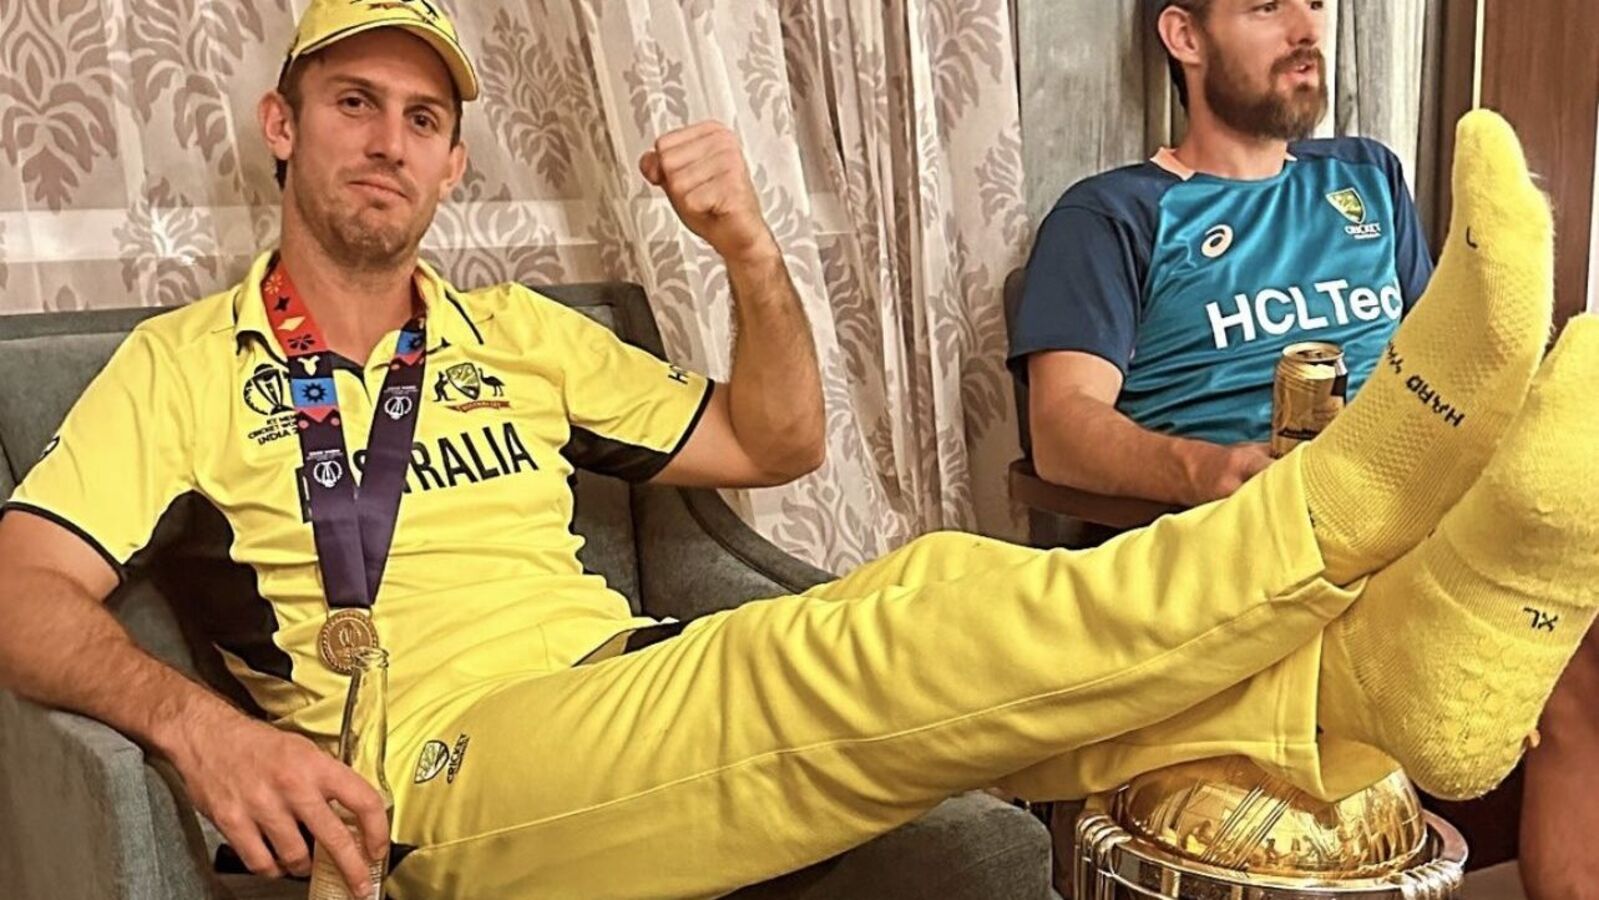 Mitchell Marsh booked in Aligarh for putting feet on World Cup trophy, complainant seeks bar on him playing in India